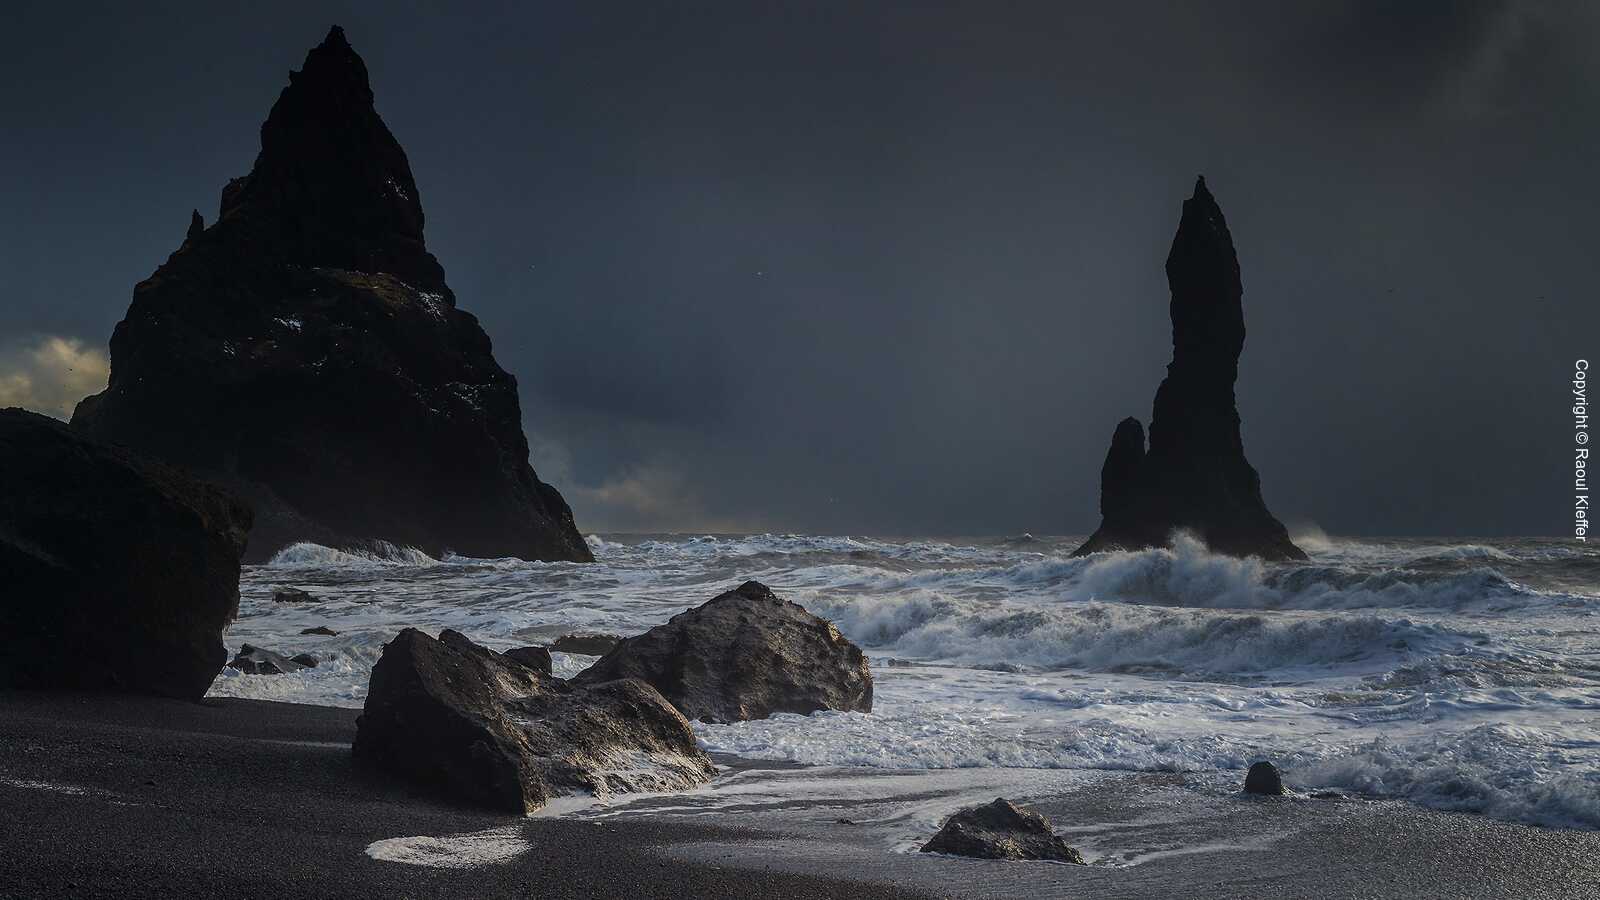 The most beautiful photos of Iceland